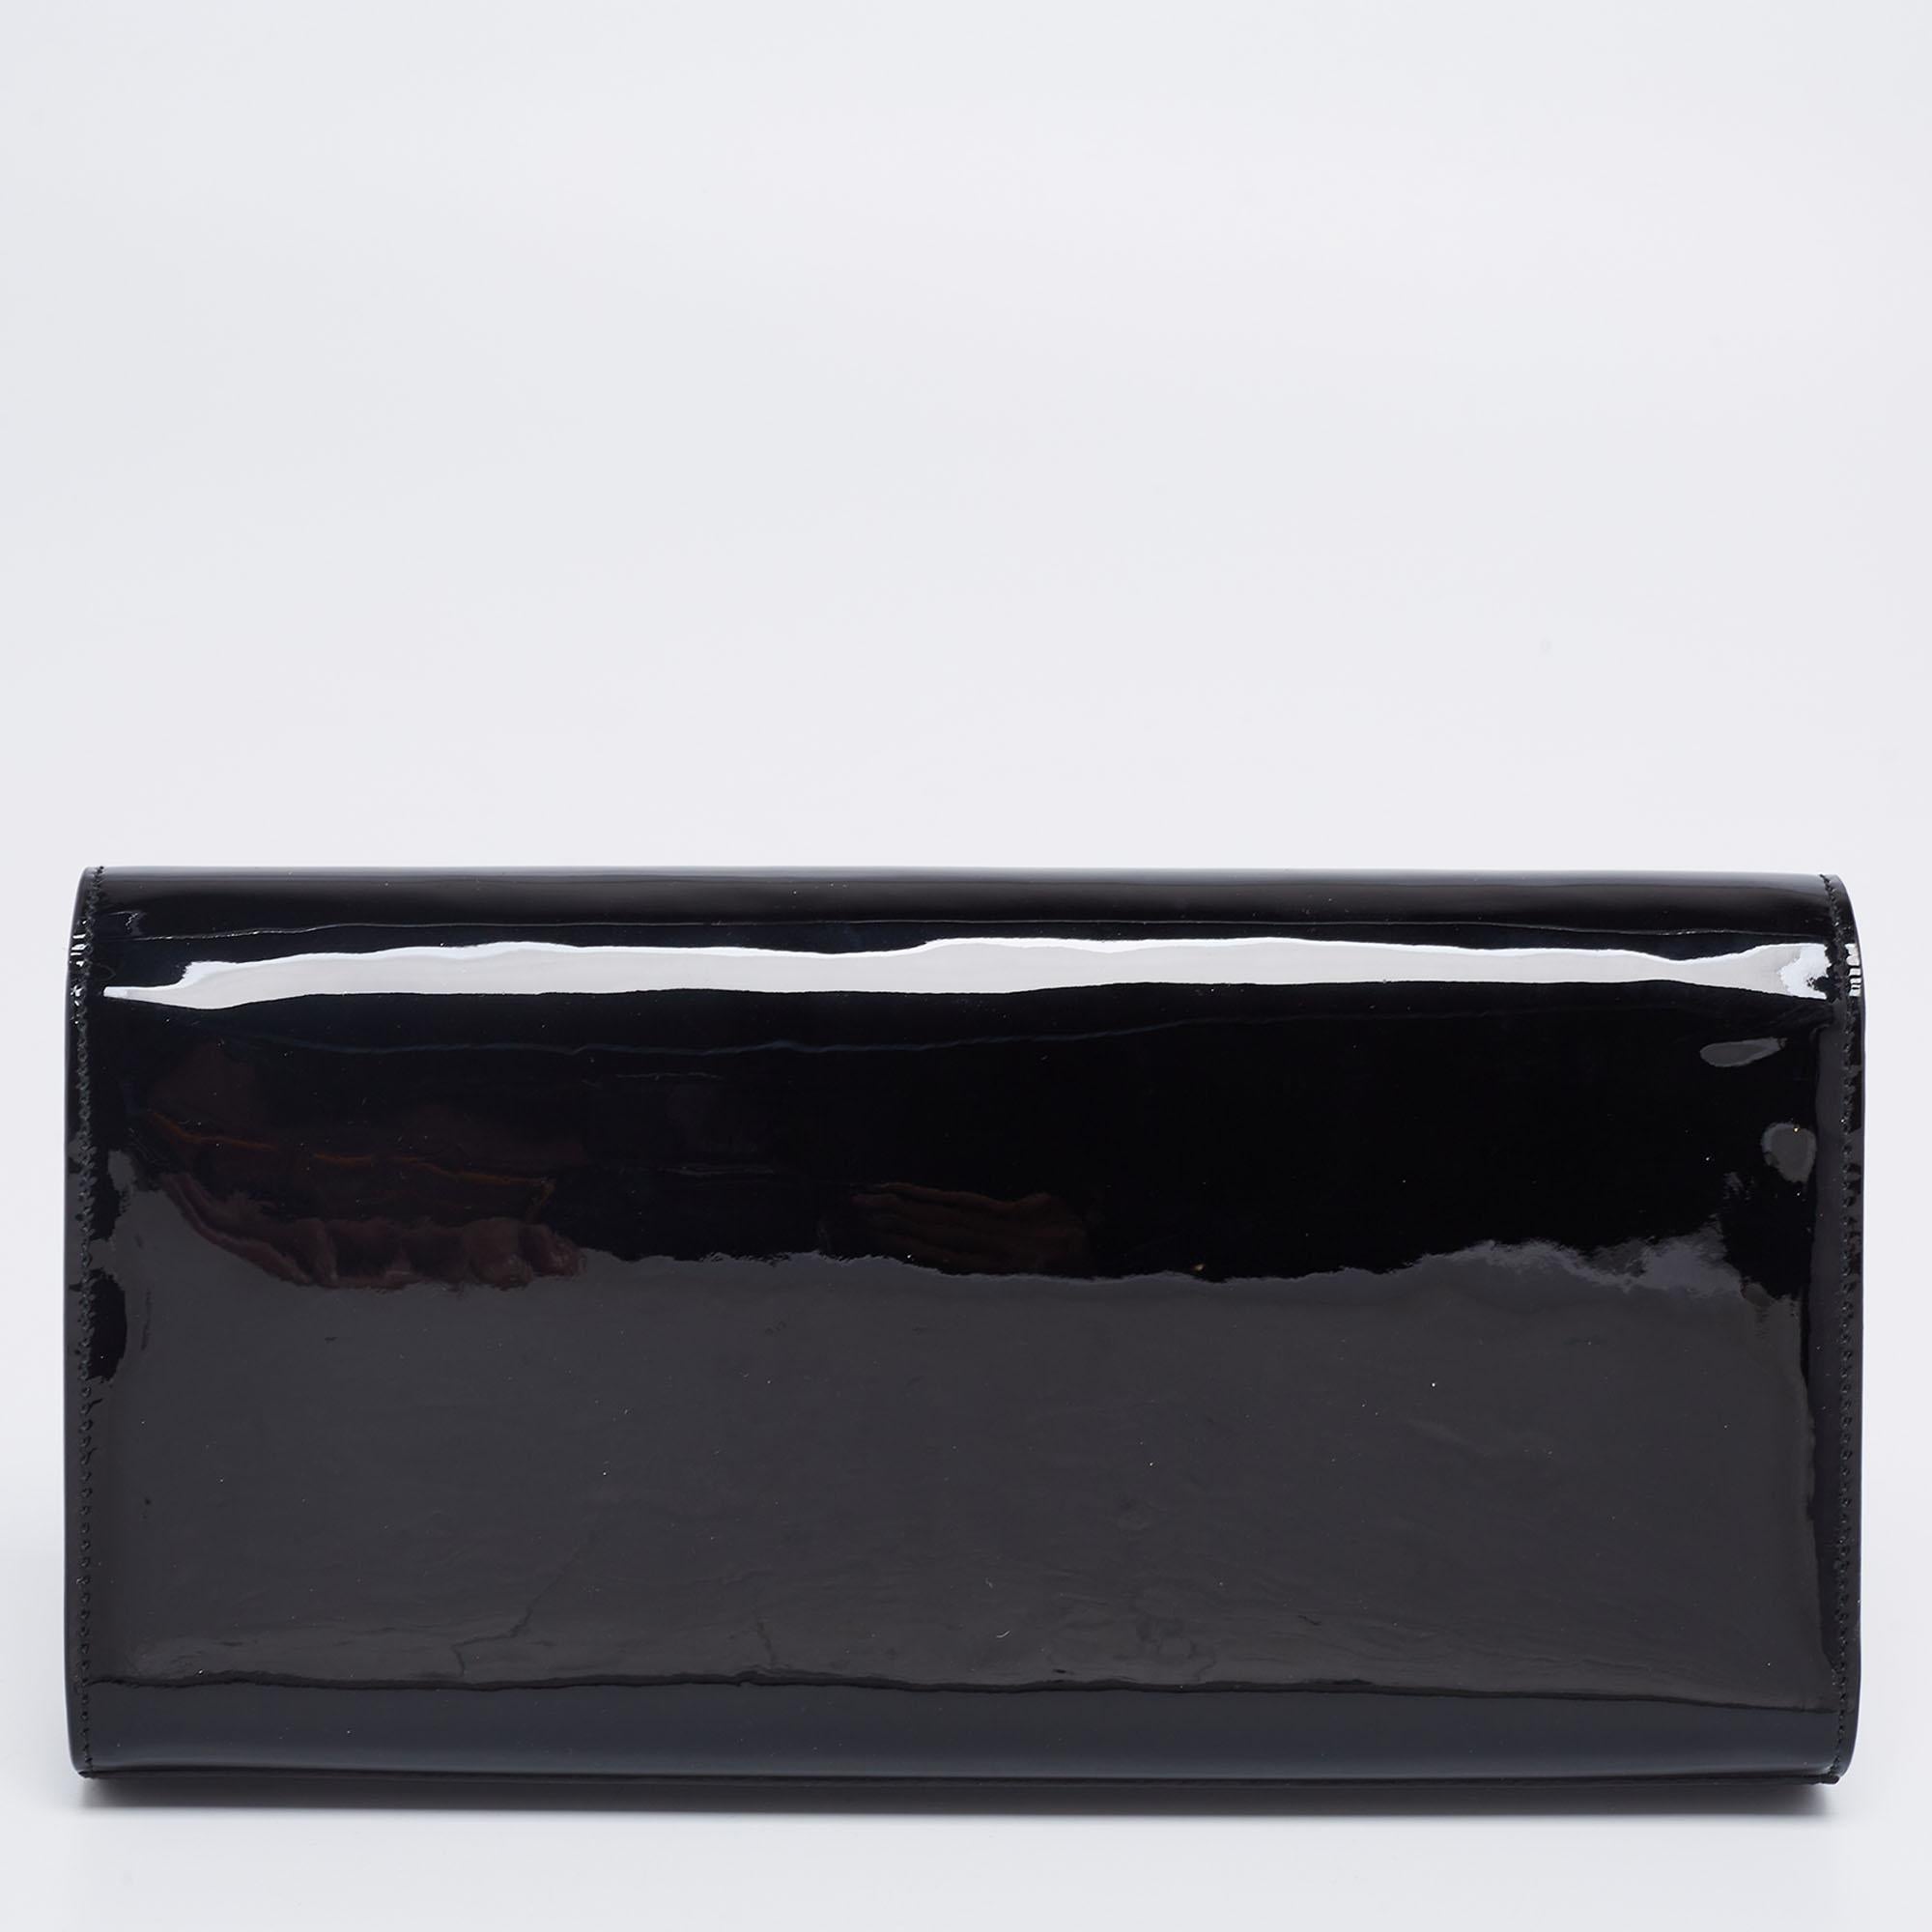 Meticulously crafted from glossy patent leather, this black Saint Laurent Kate clutch delivers a sophisticated look. The clutch features a gold-tone YSL logo on the front flap and a suede interior with a slip pocket.

Includes: Info Booklet